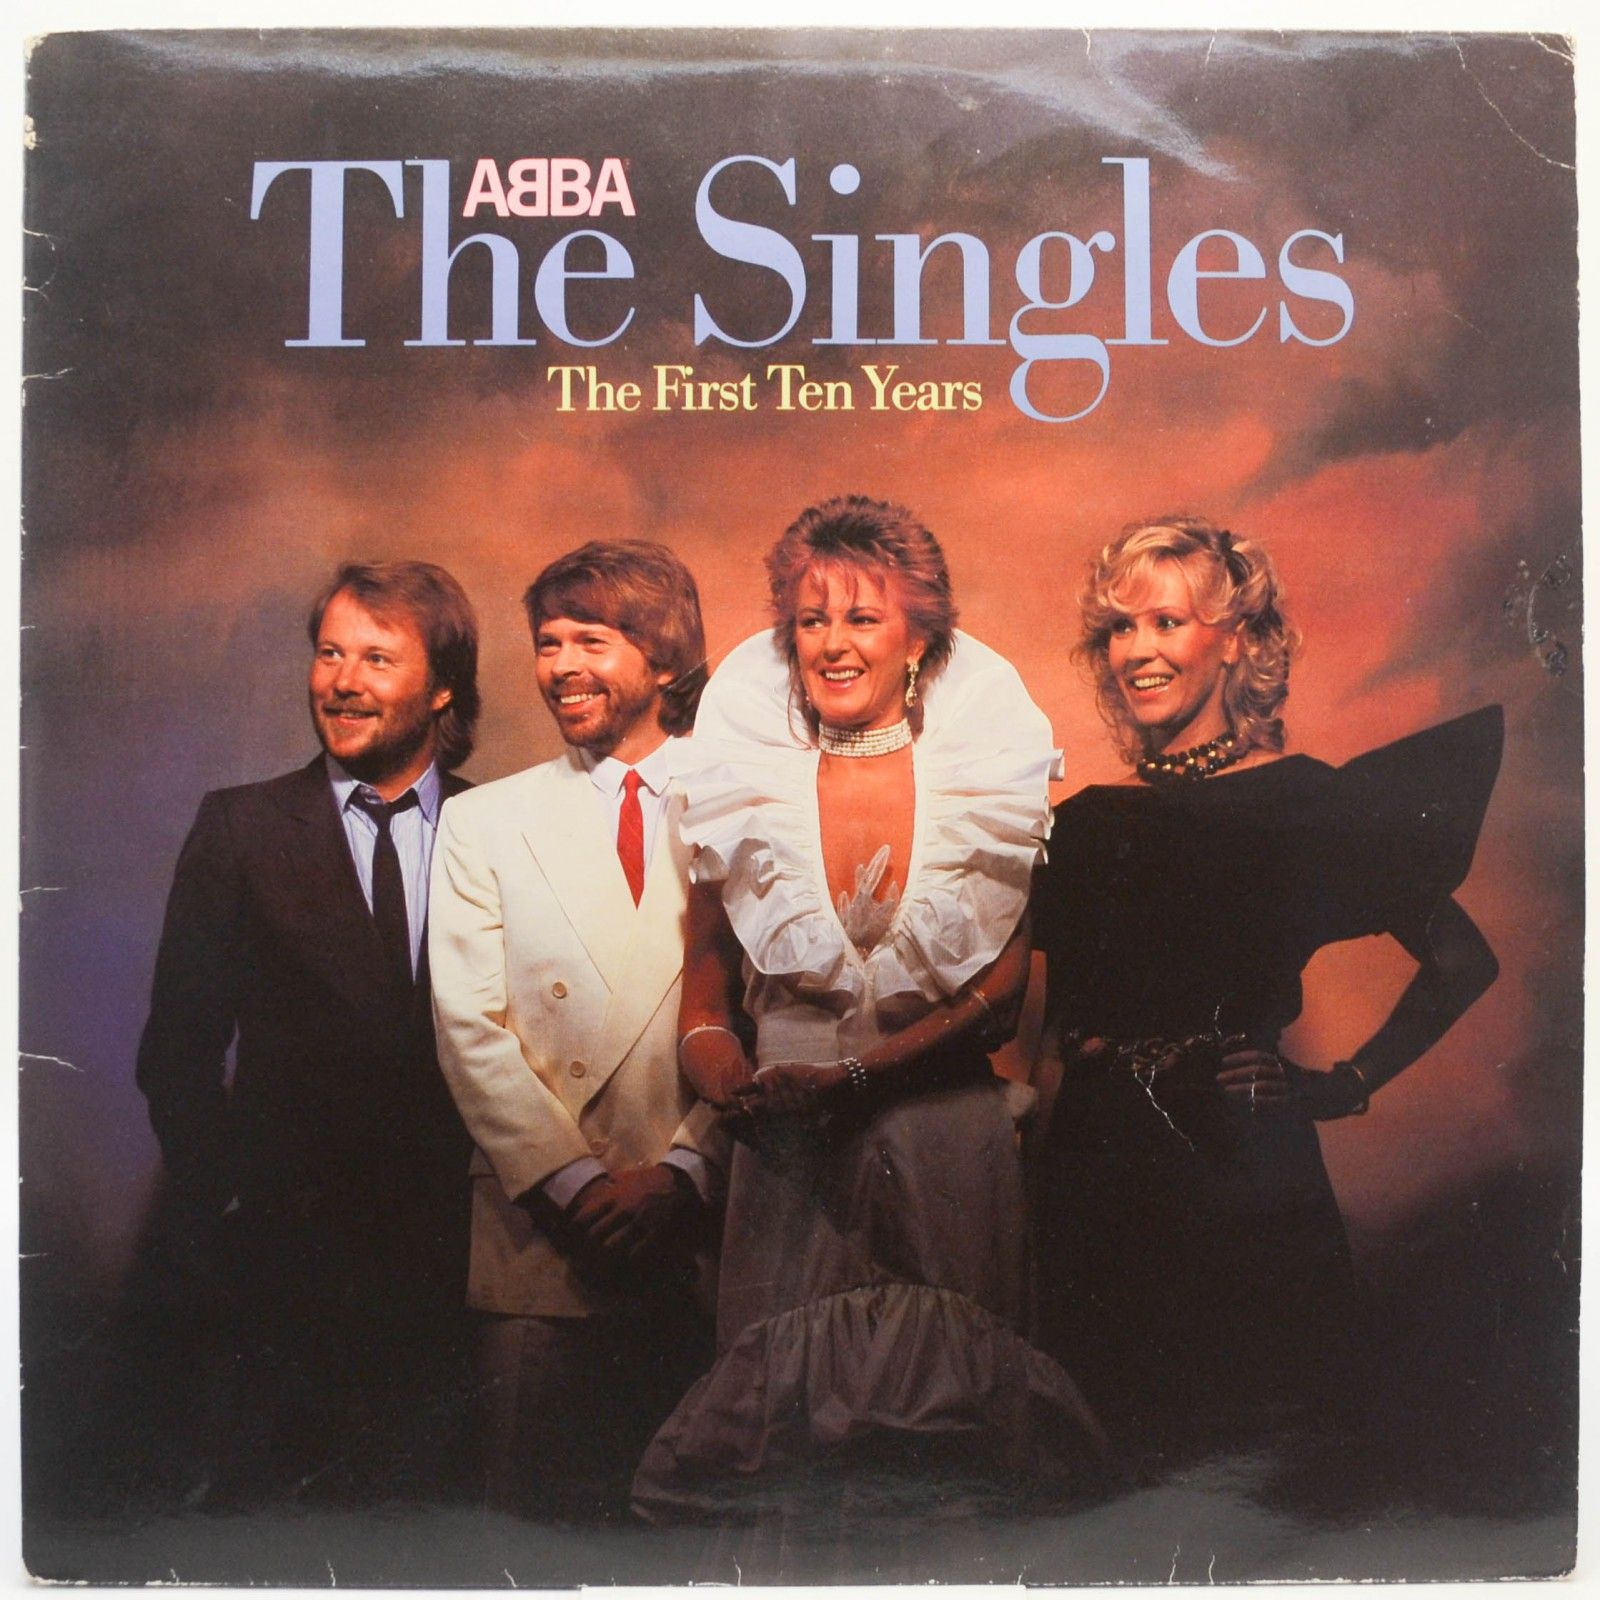 ABBA — The Singles (The First Ten Years) (2LP, Sweden), 1982